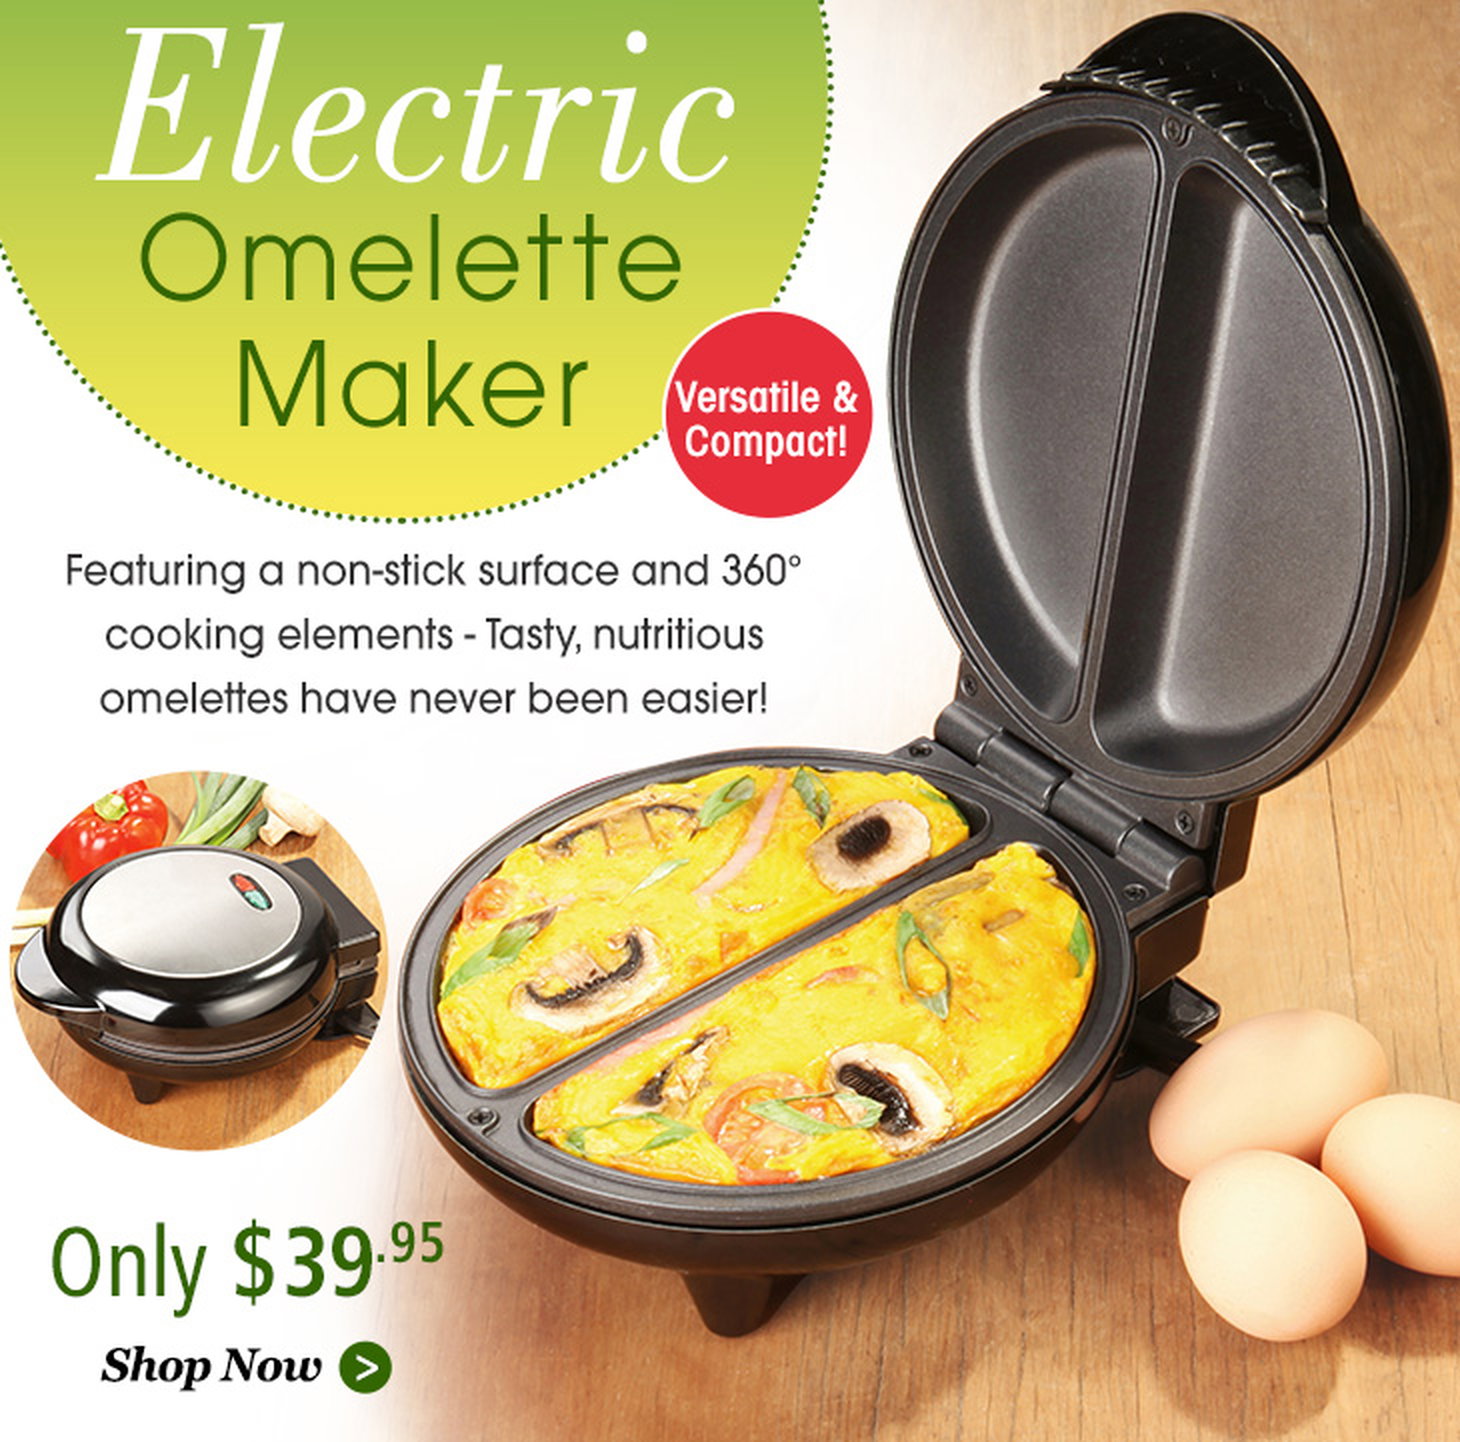 Innovations: Electric Omelette Maker - A delicious breakfast in